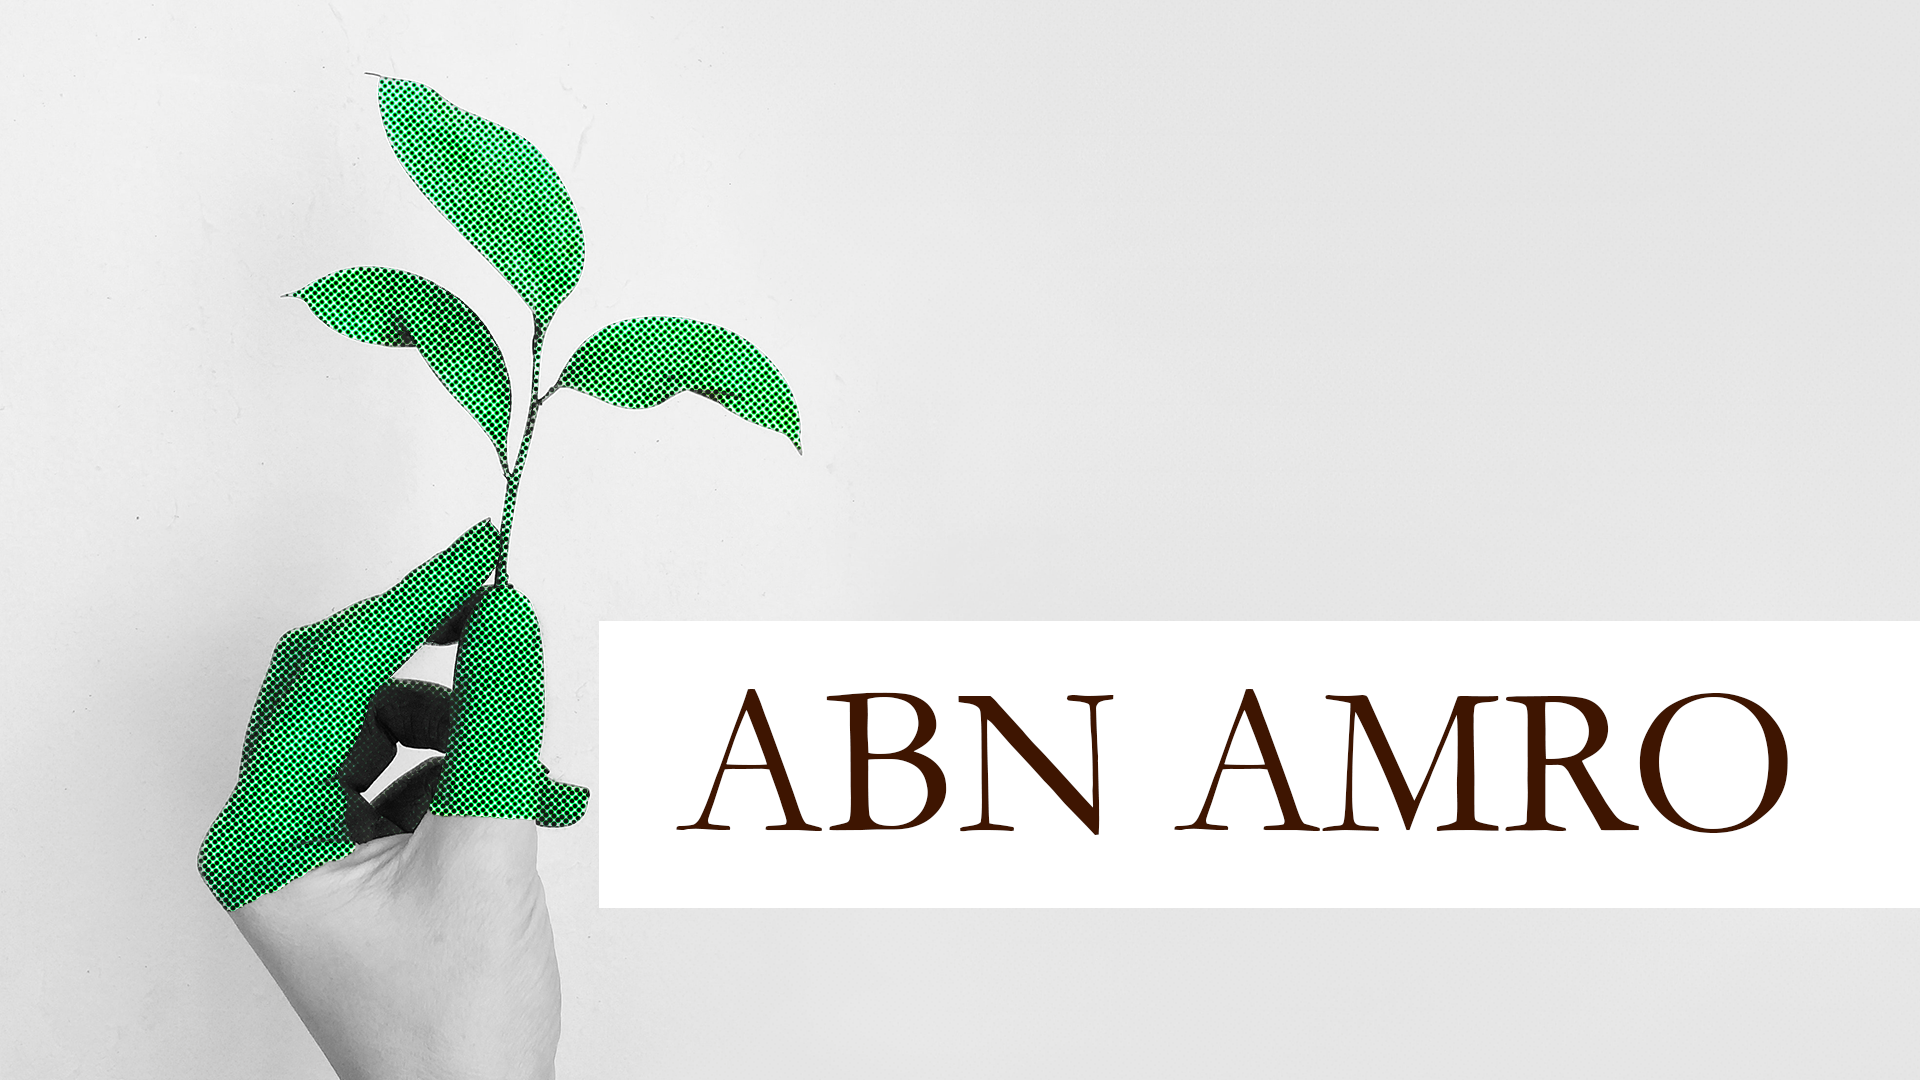 ABN AMRO for sustainability in time of high interest rates